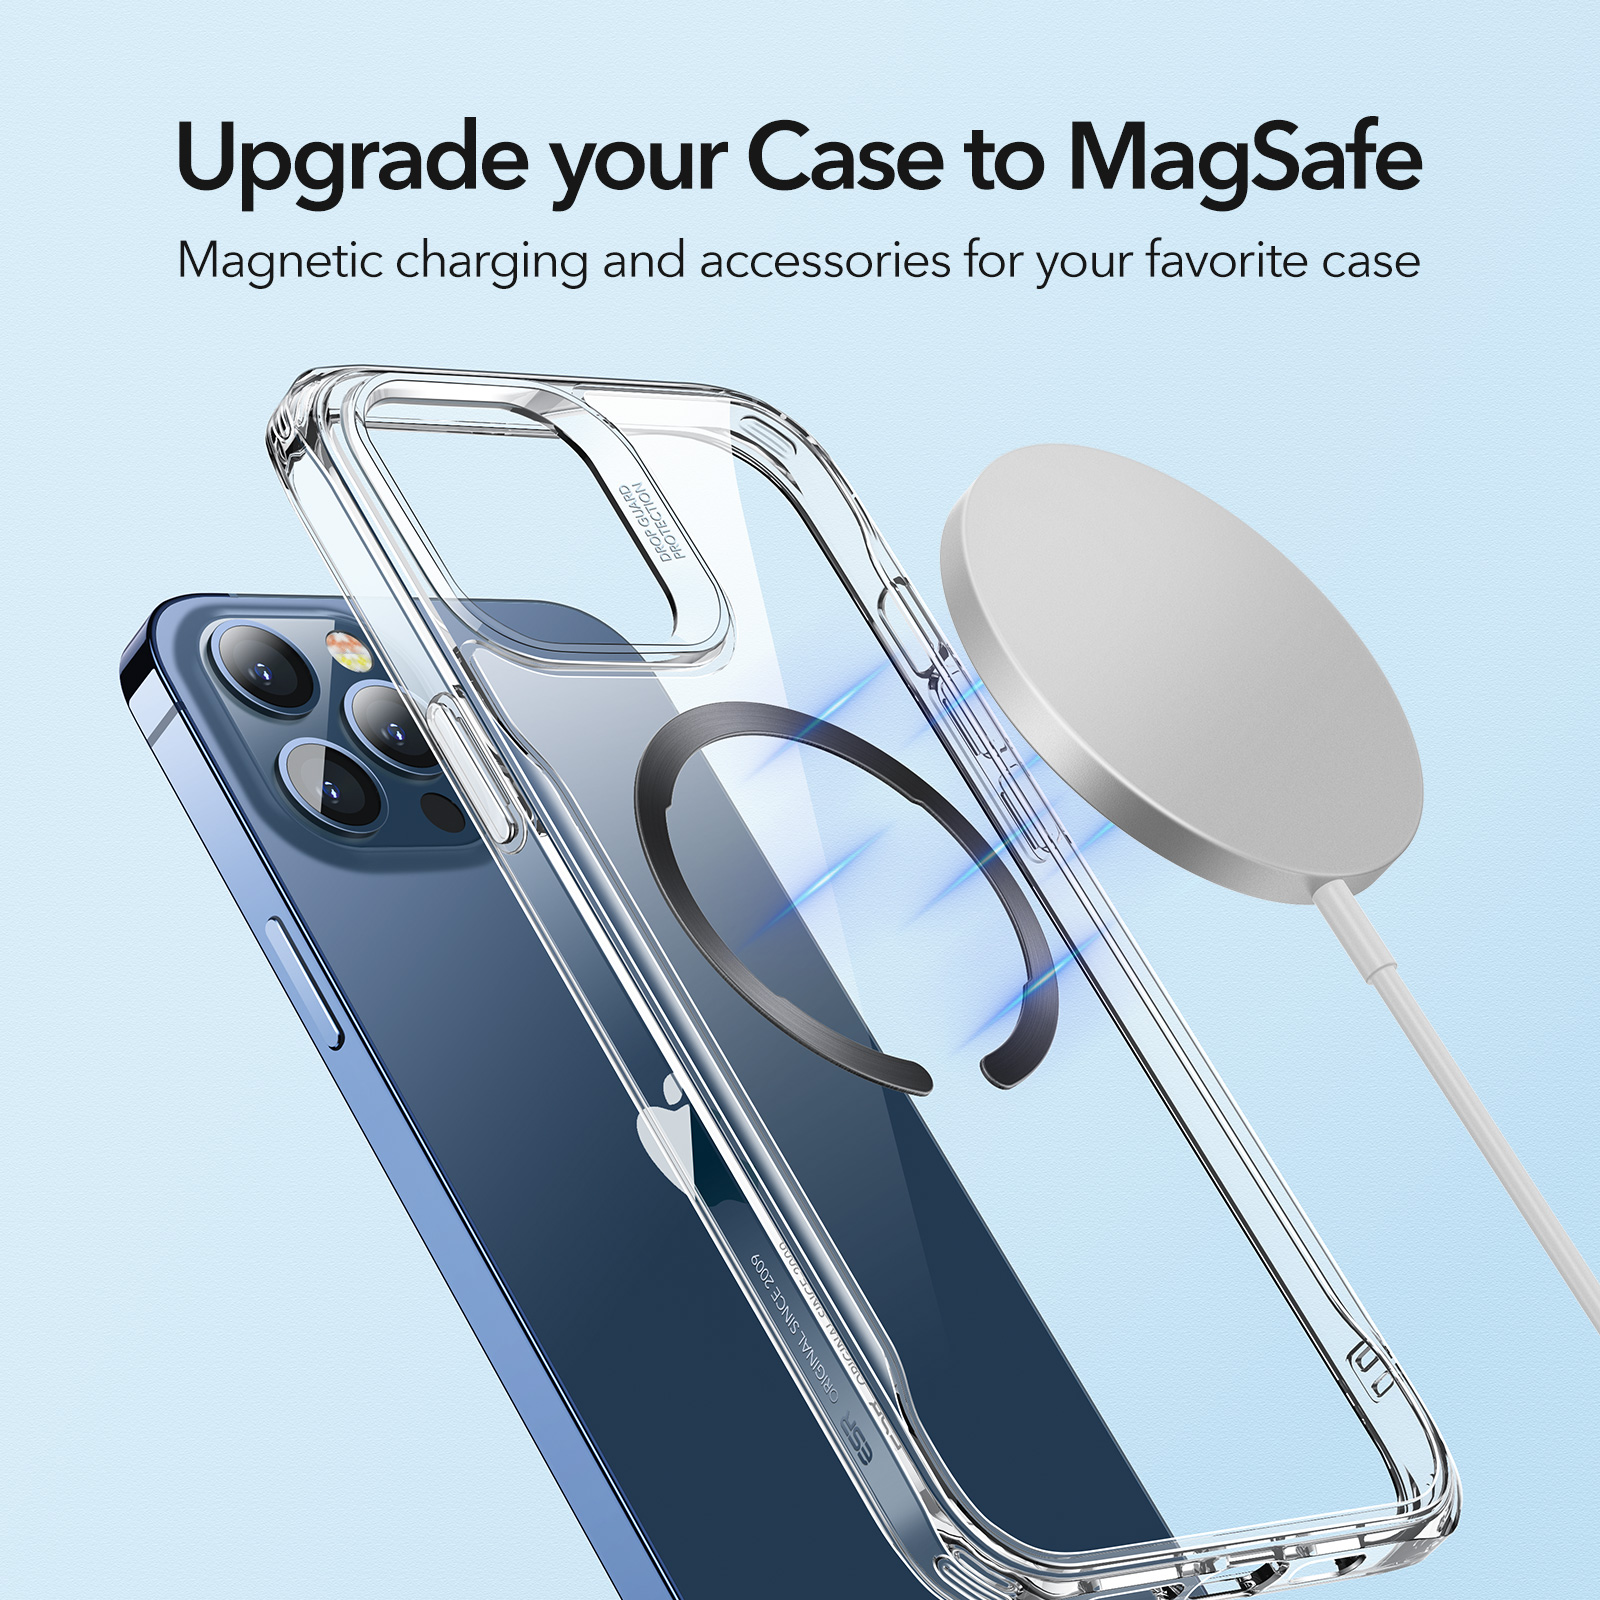 Magnetic Universal Rings with Sticker, 2 PCS Magsafe Sticker Magnet  Conversion Rings for Magsafe Accessories & Wireless Charger Compatible with  iPhone